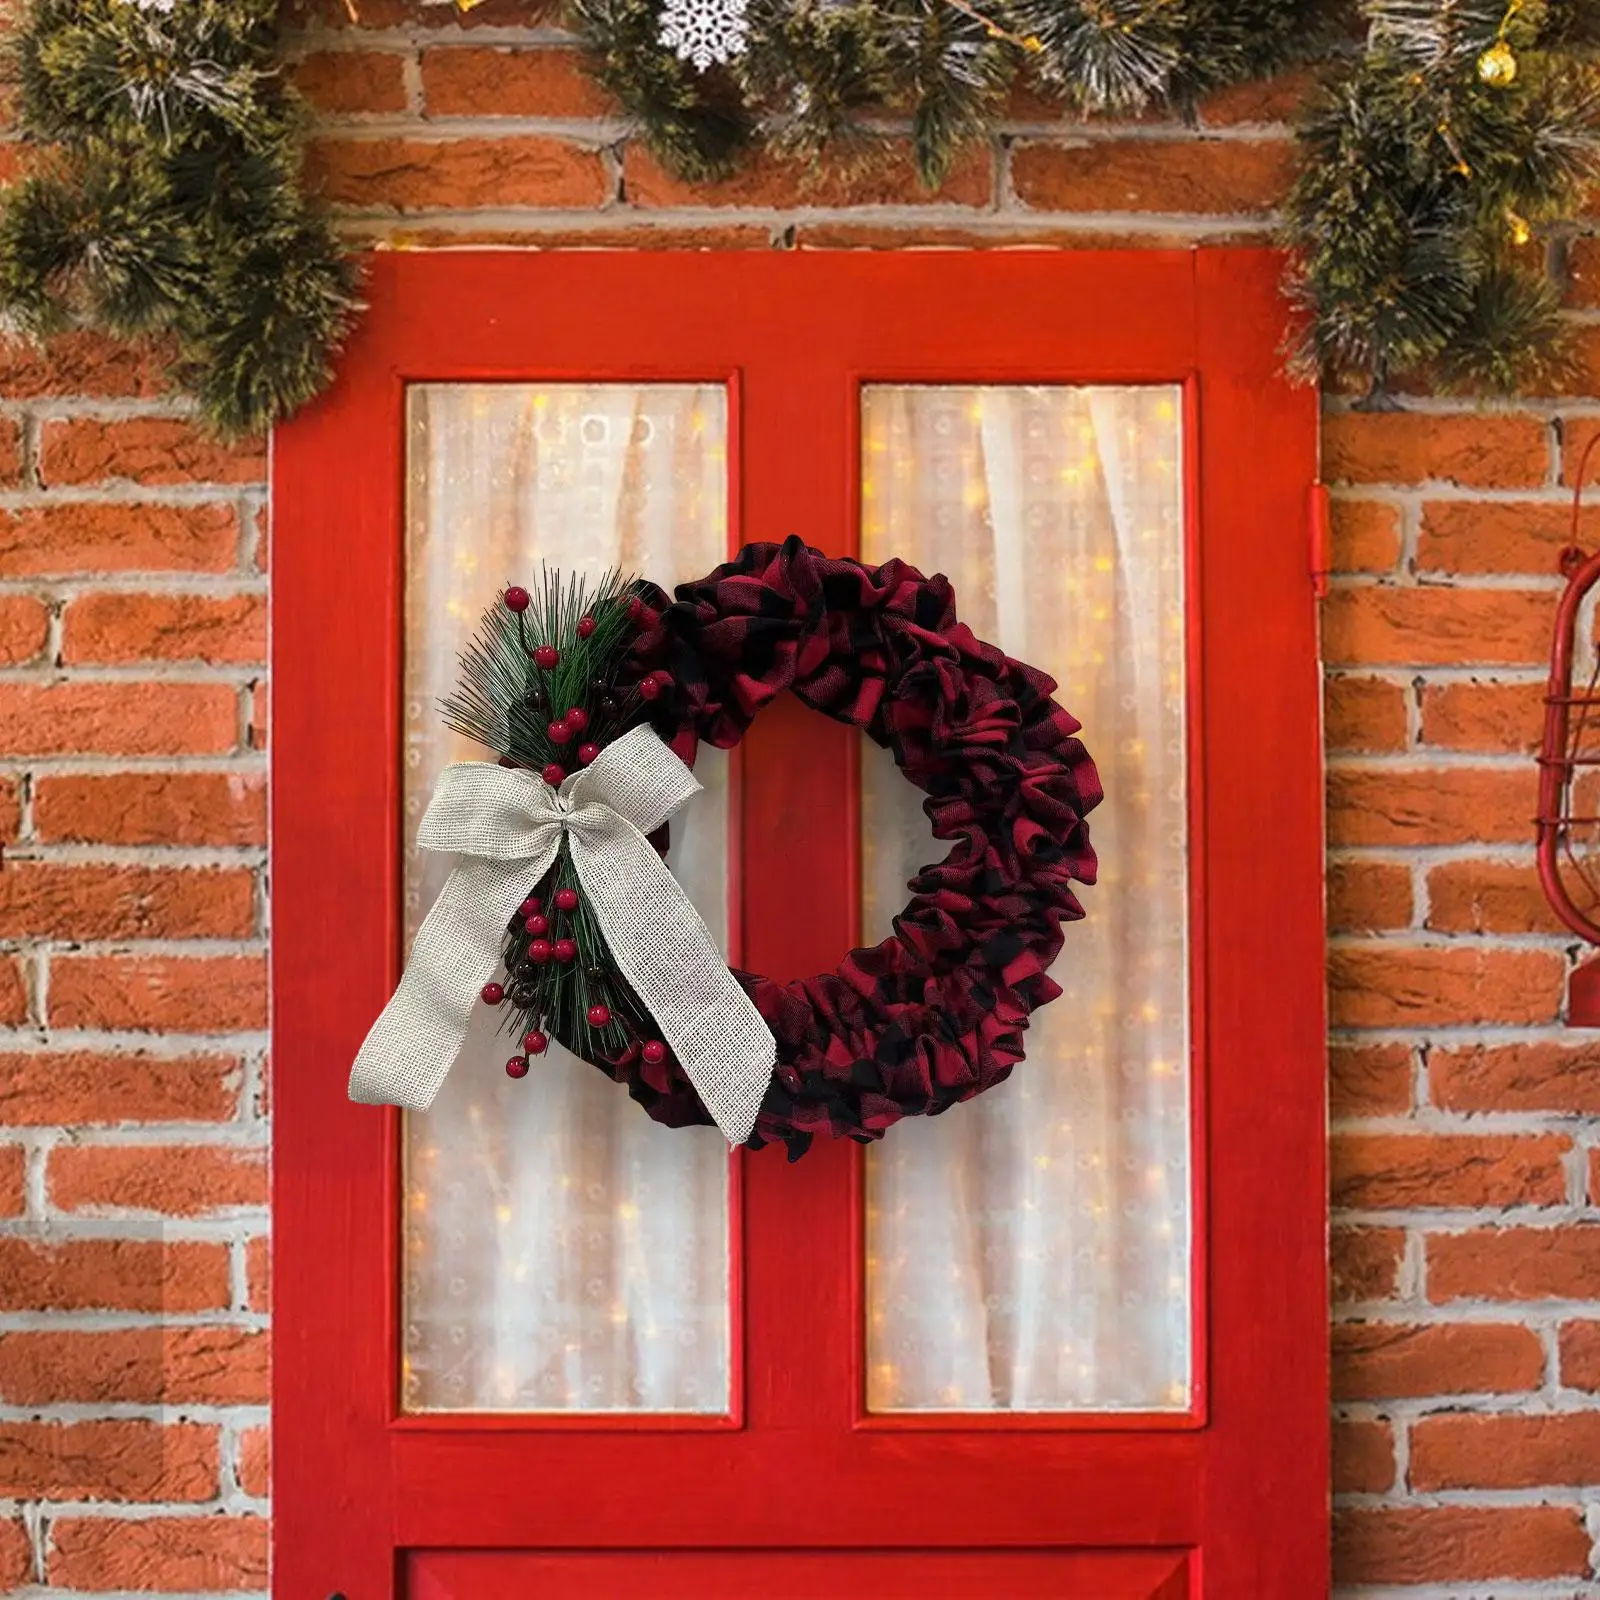 Christmas Round Wreath Front Door Wreath Rustic Wall Decor Artificial Wreath Flower Wreaths for Festival Outside Balcony Home